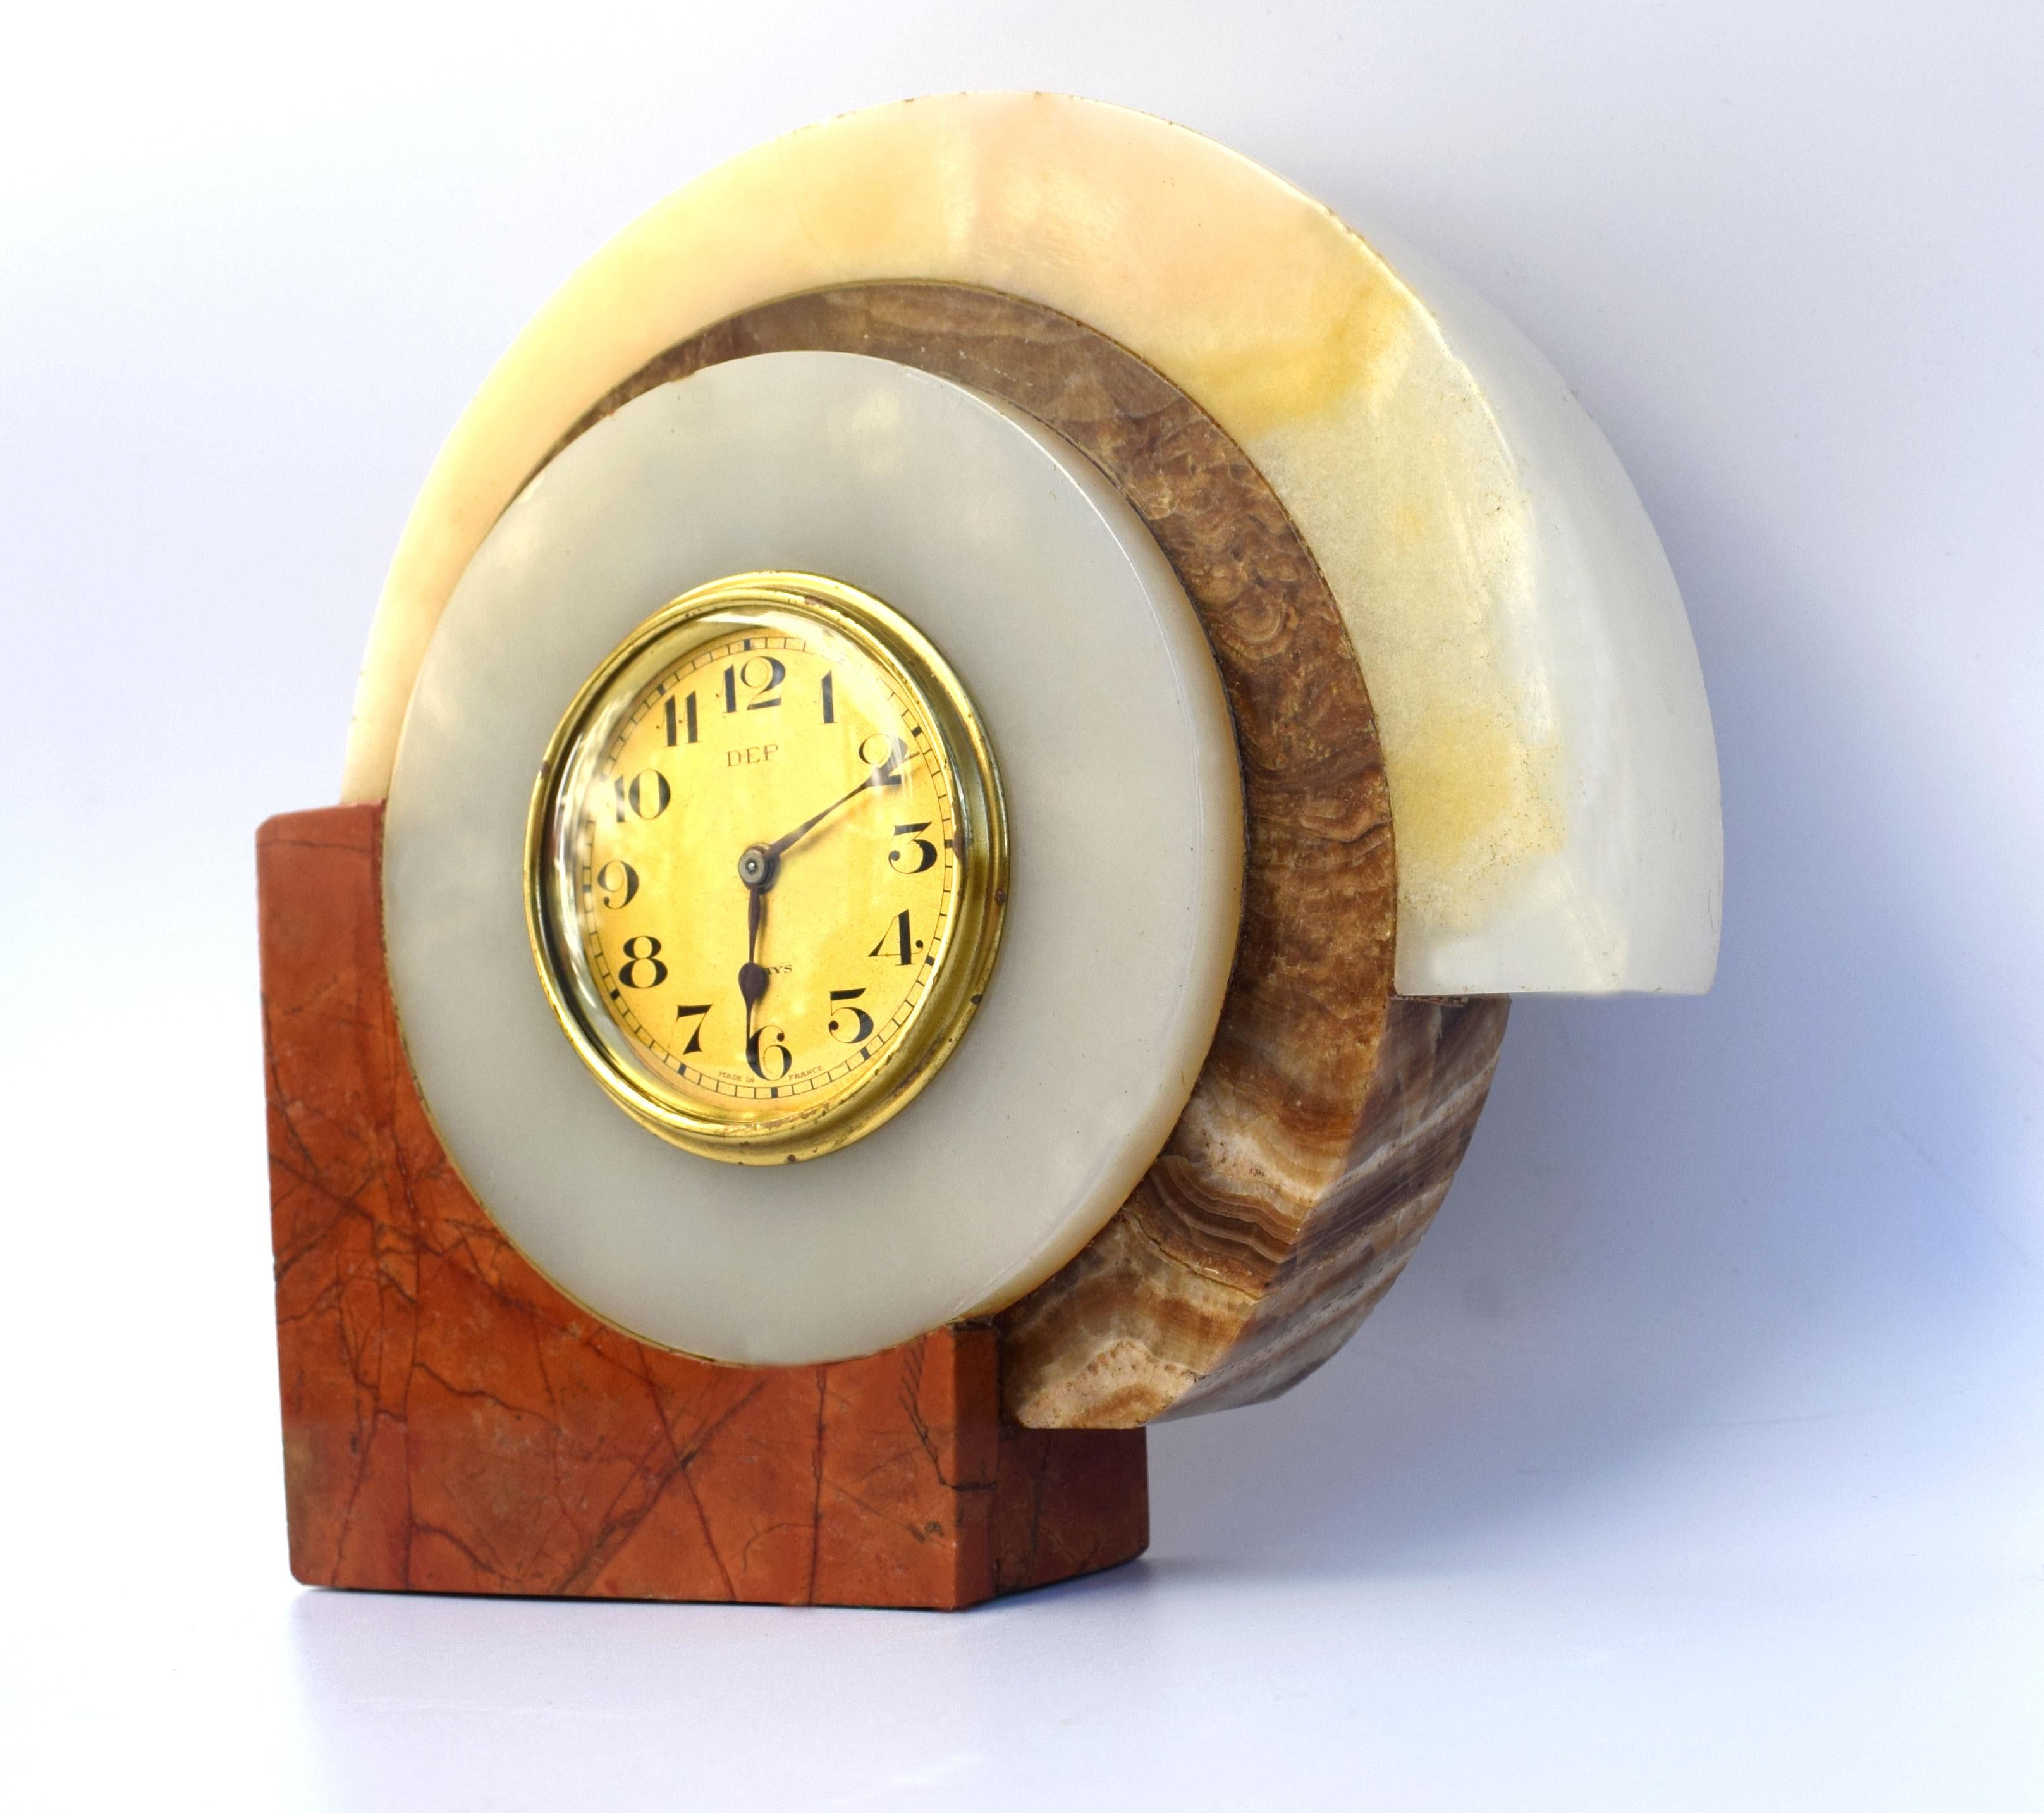 Very striking 1930s Art Deco French clock by Dep. The case is solid multicolored marble, the bezel and face are in gold tone metal. Very iconic Art Deco marble casing. This clock is a really good size and ideal as a desk clock or side table. All of